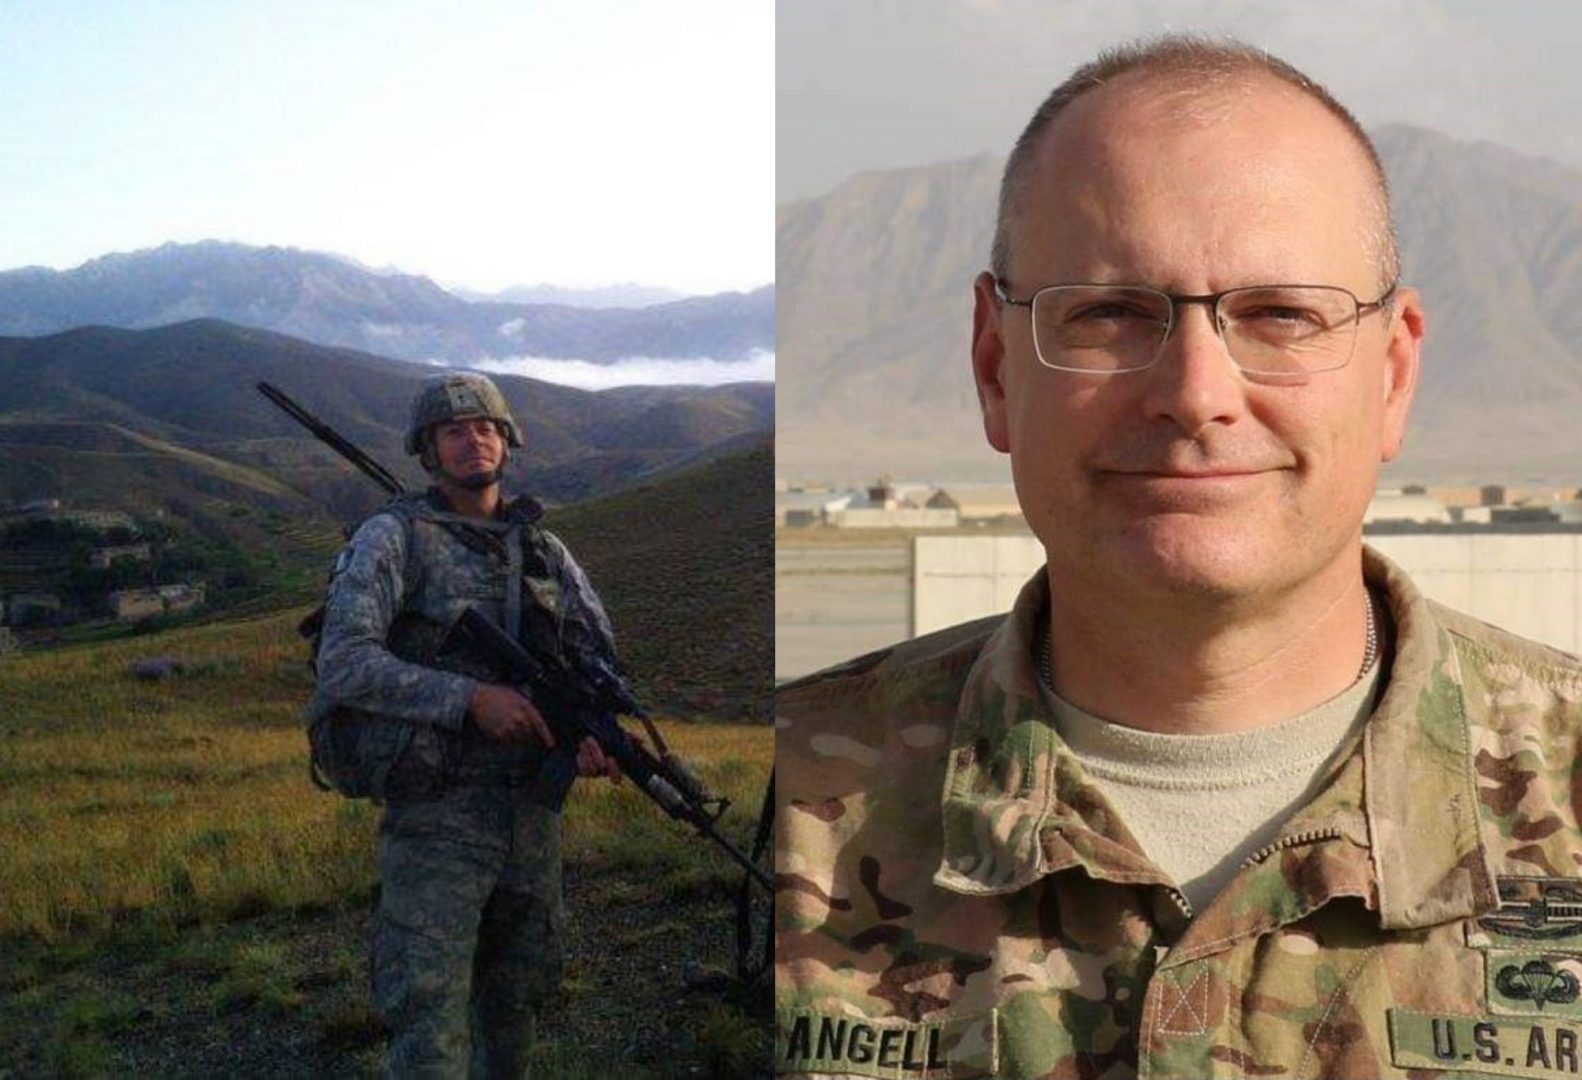 Sergeant Tom Bourke (left) is a Marine Corps and Pennsylvania National Guard veteran who was stationed in Afghanistan in 2010. And Lieutenant Colonel Corey Angell (right), the spokesperson for the Pennsylvania branch of the Veterans of Foreign Wars, also served two tours in Afghanistan with the Army.